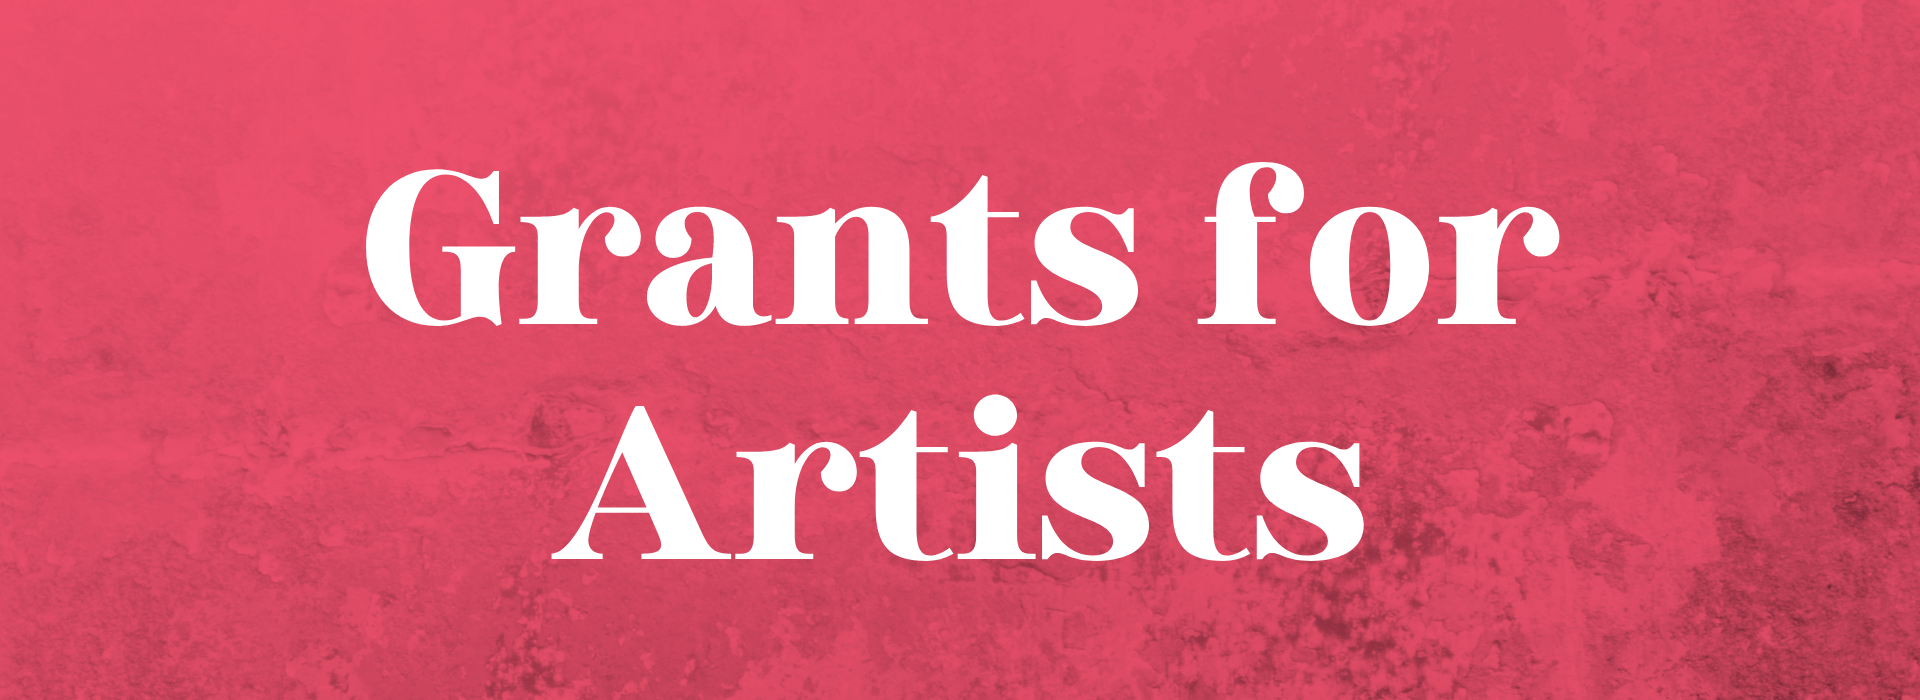 Grants for Artists